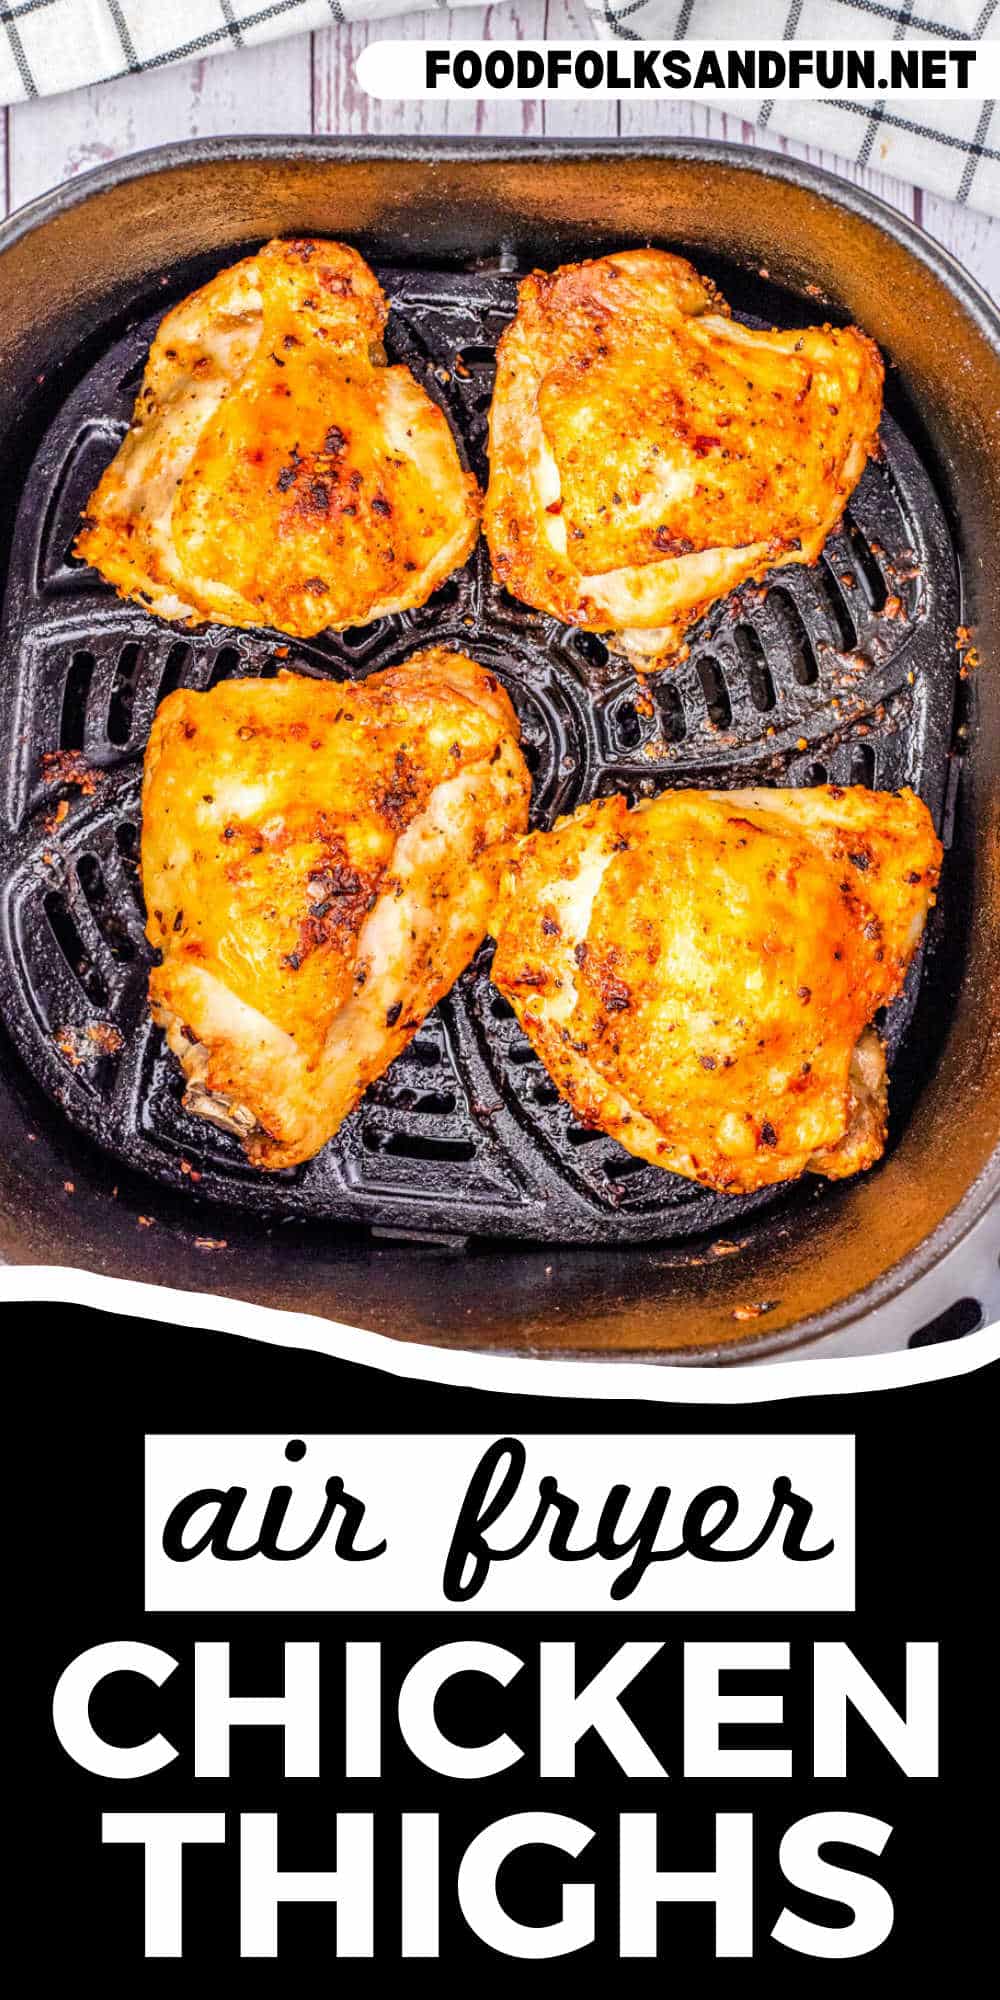 Air fryer chicken thighs deliver mouthwatering flavor. They’re a quick and easy crowd-pleaser that’s juicy and perfectly crisp.  via @foodfolksandfun